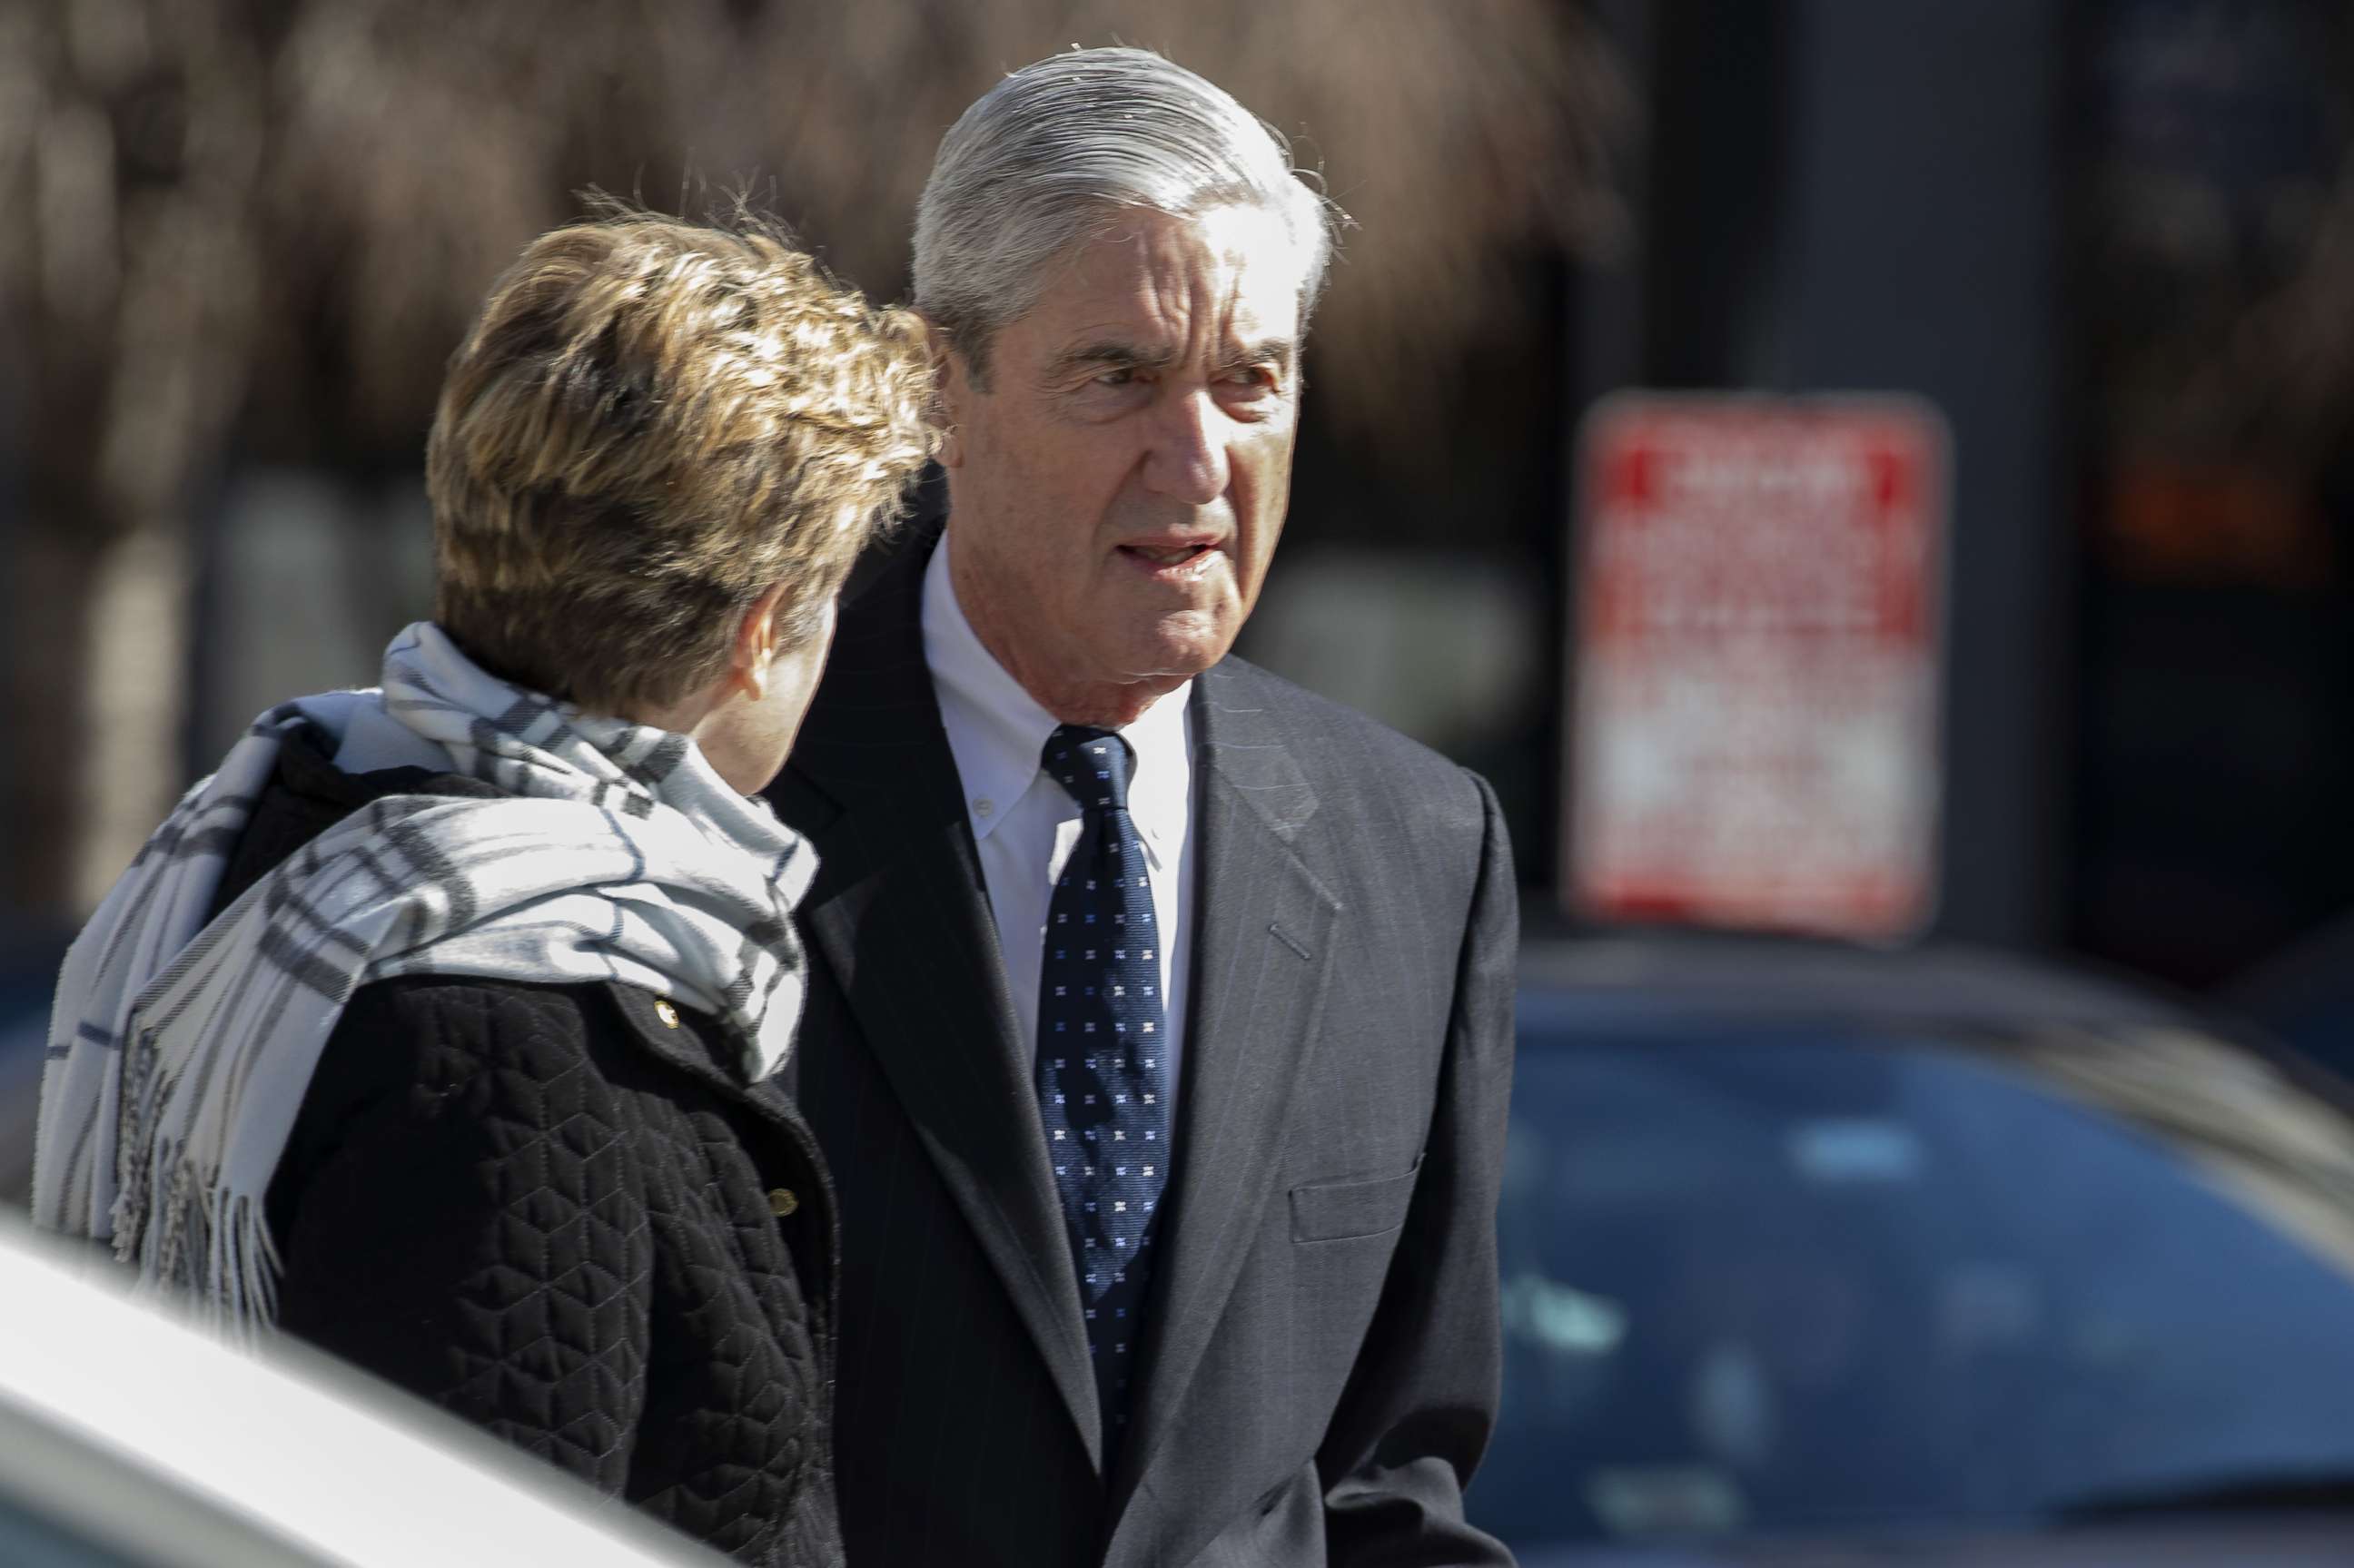 PHOTO: Special Counsel Robert Mueller walks in Washington on March 24, 2019.